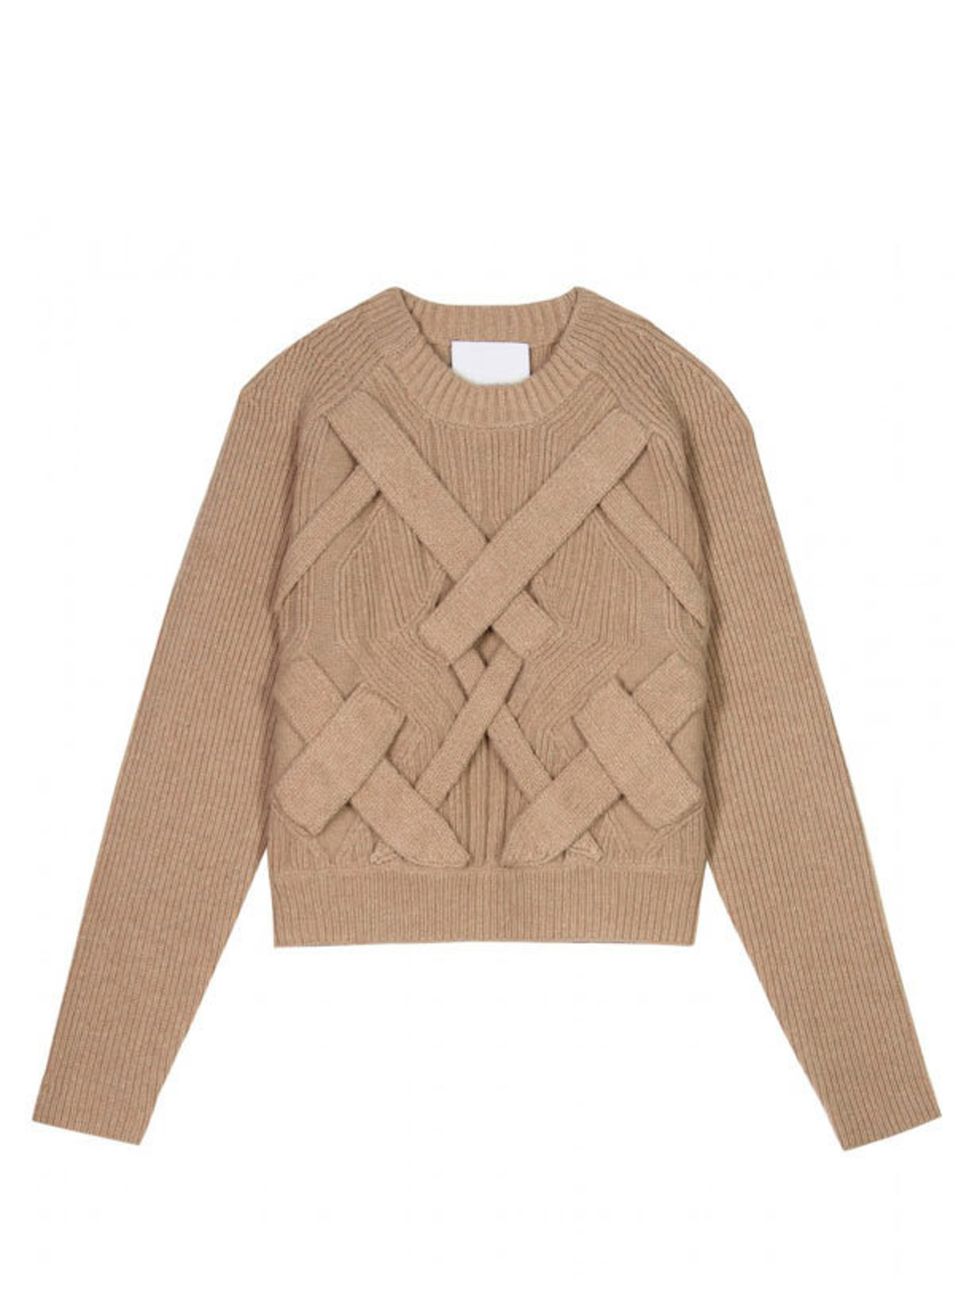 <p>3.1 Phillip Lim cable knit jumper, £449, at <a href="http://www.mytheresa.com/uk_en/3d-cable-knit-pullover-114034.html">mytheresa.com</a></p>